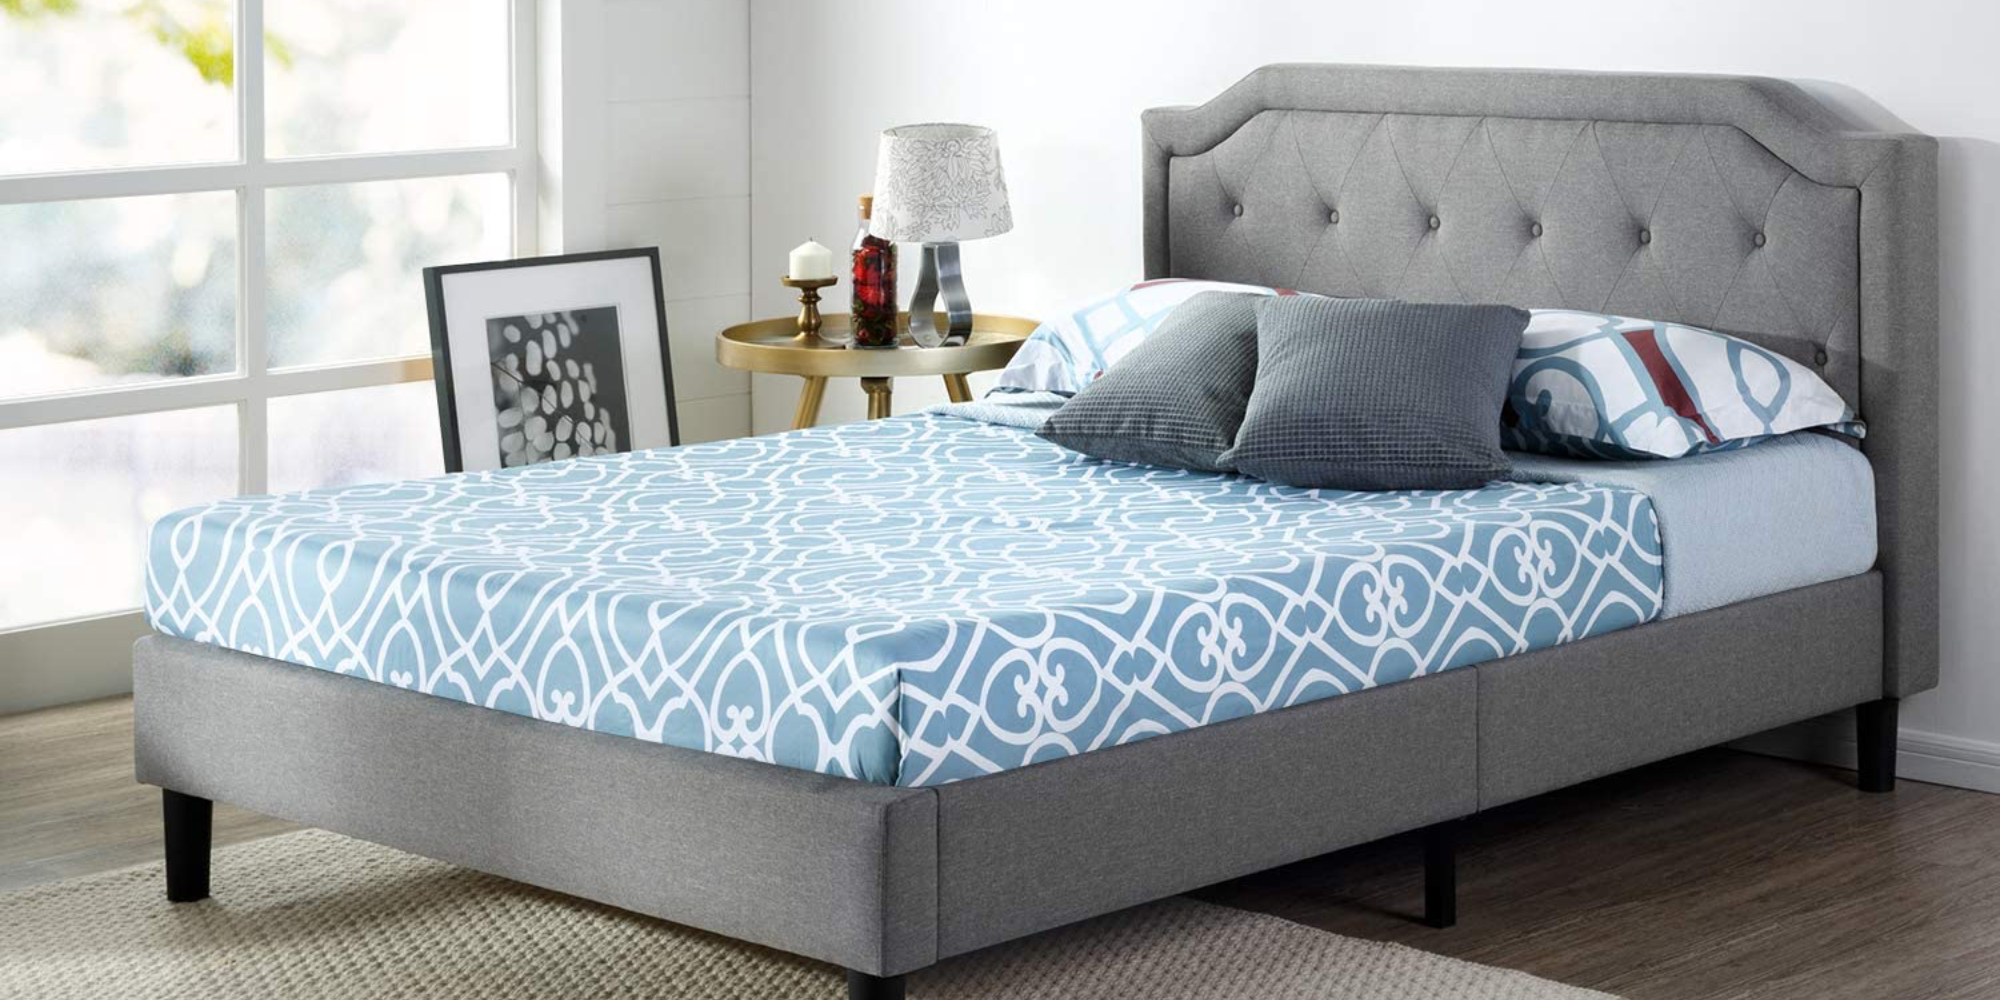 Upgrade your room with Zinus' Kellen King Bed Frame at $100 off, more